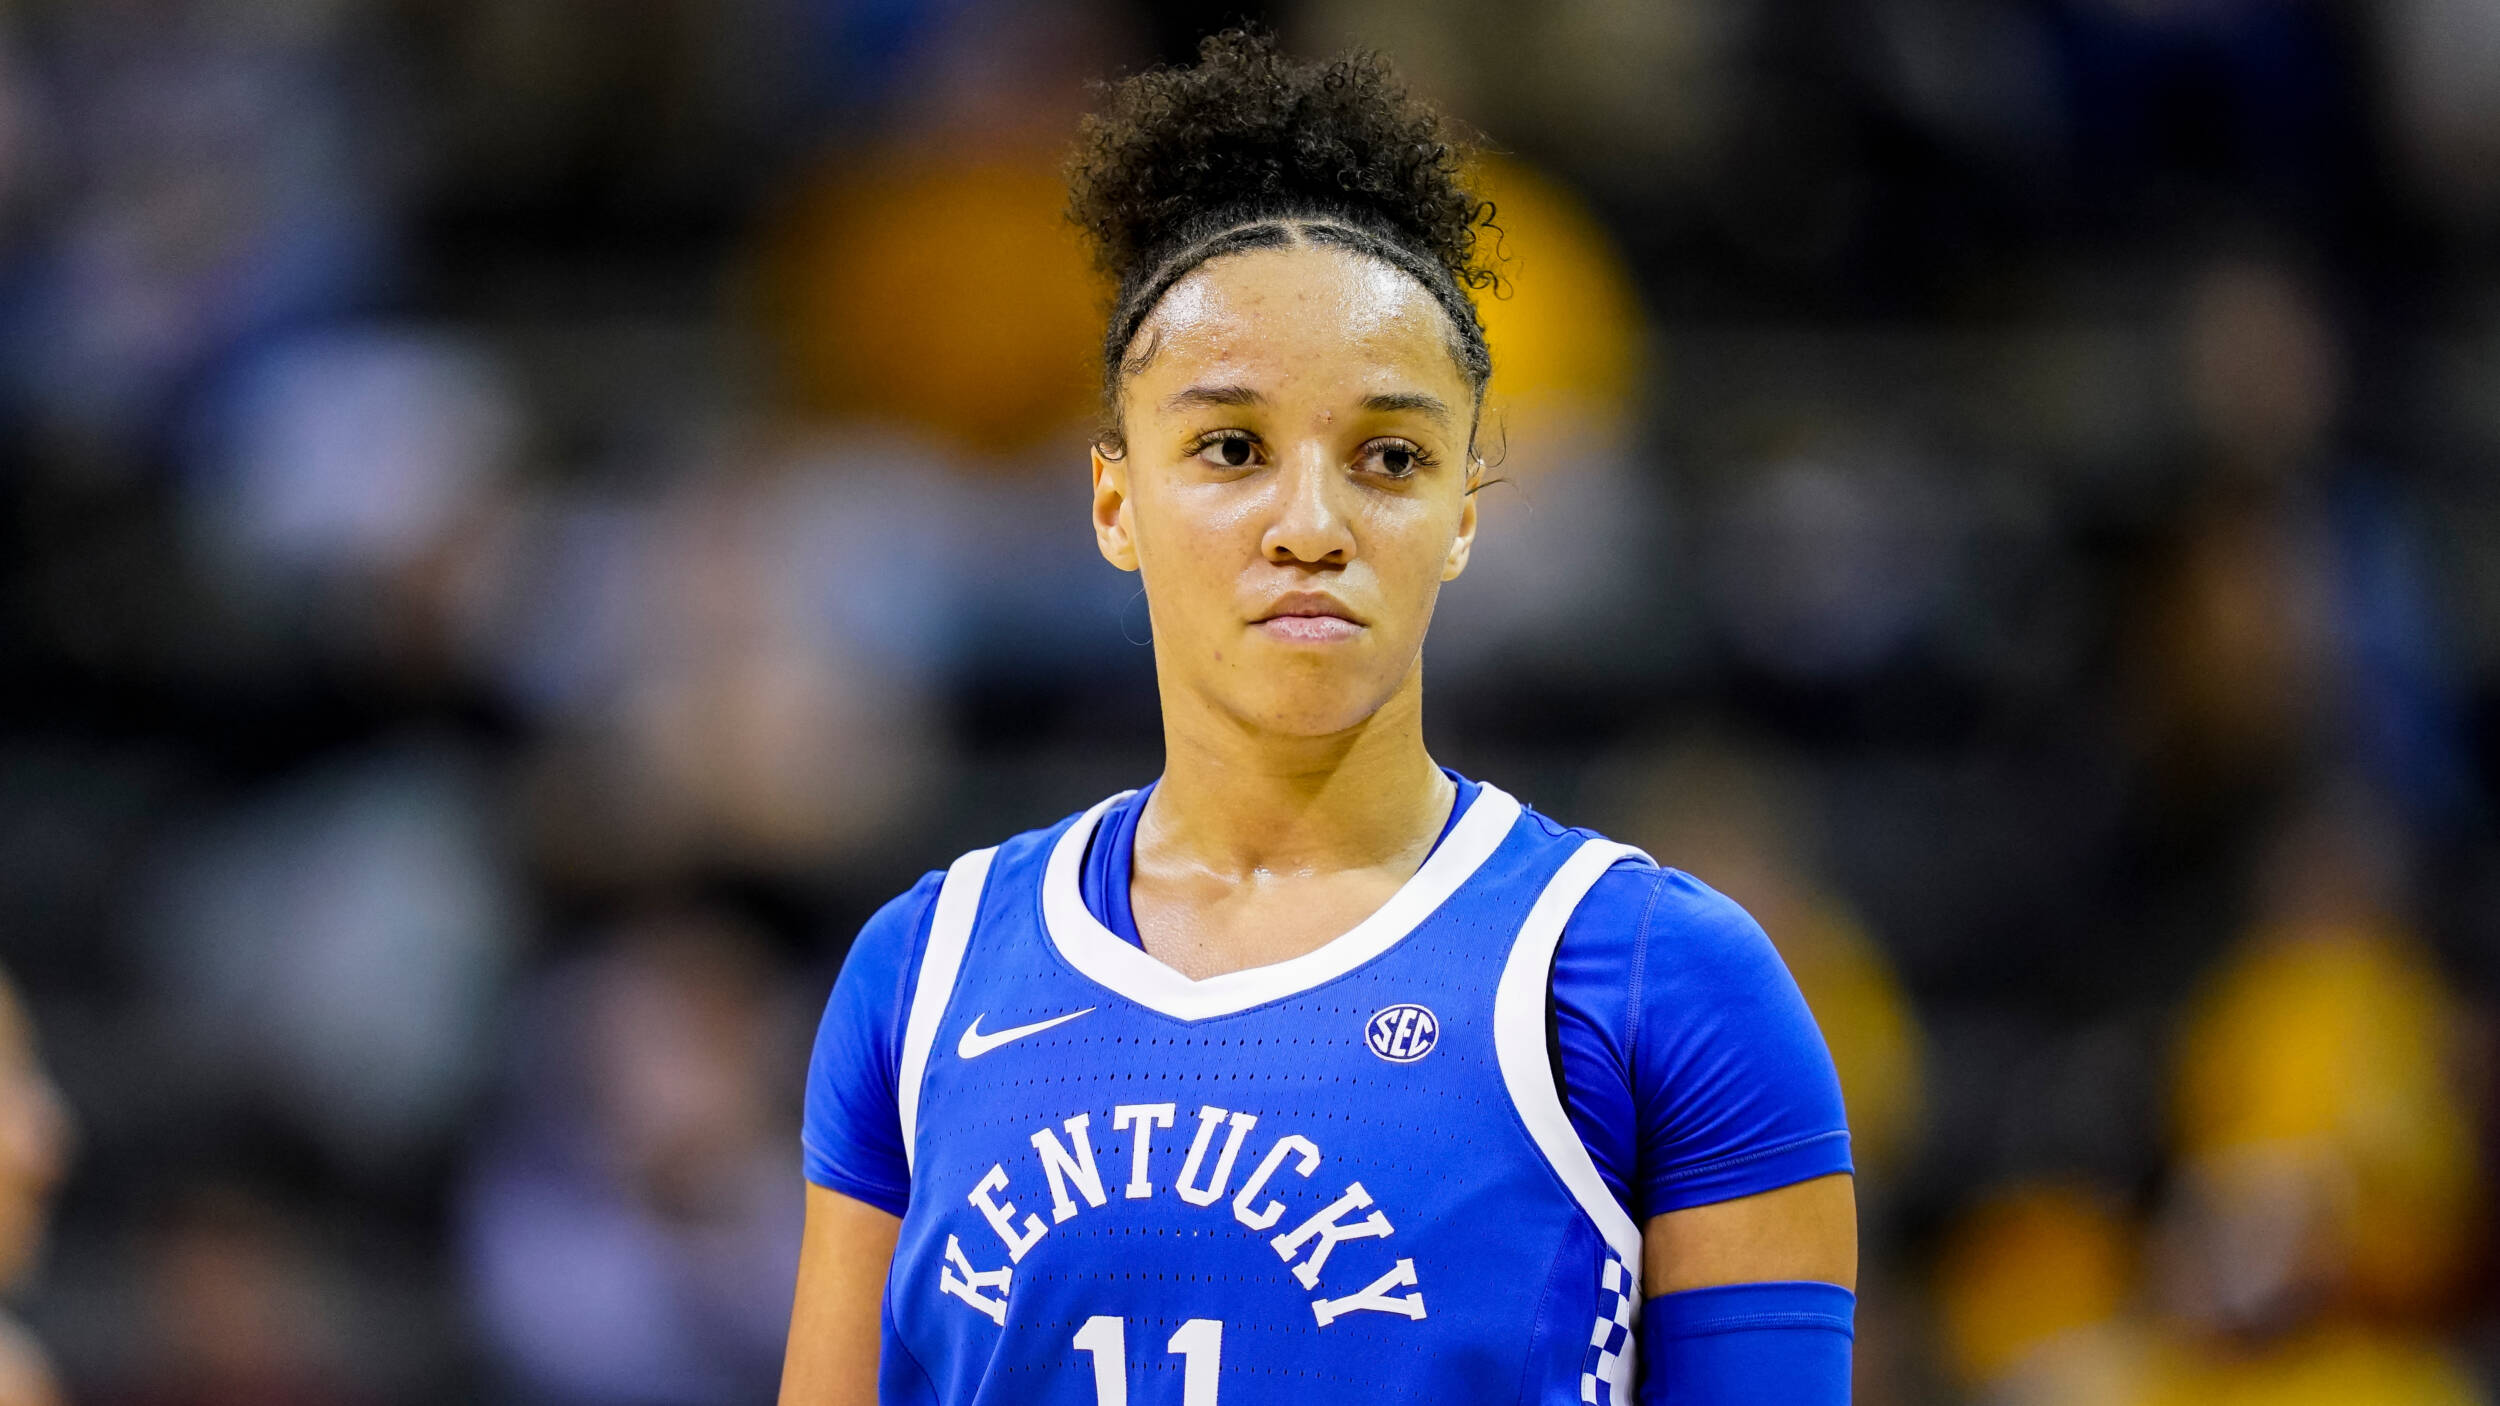 Kentucky, No. 7/6 LSU Battle in Rupp Arena on Sunday at 2 p.m. ET